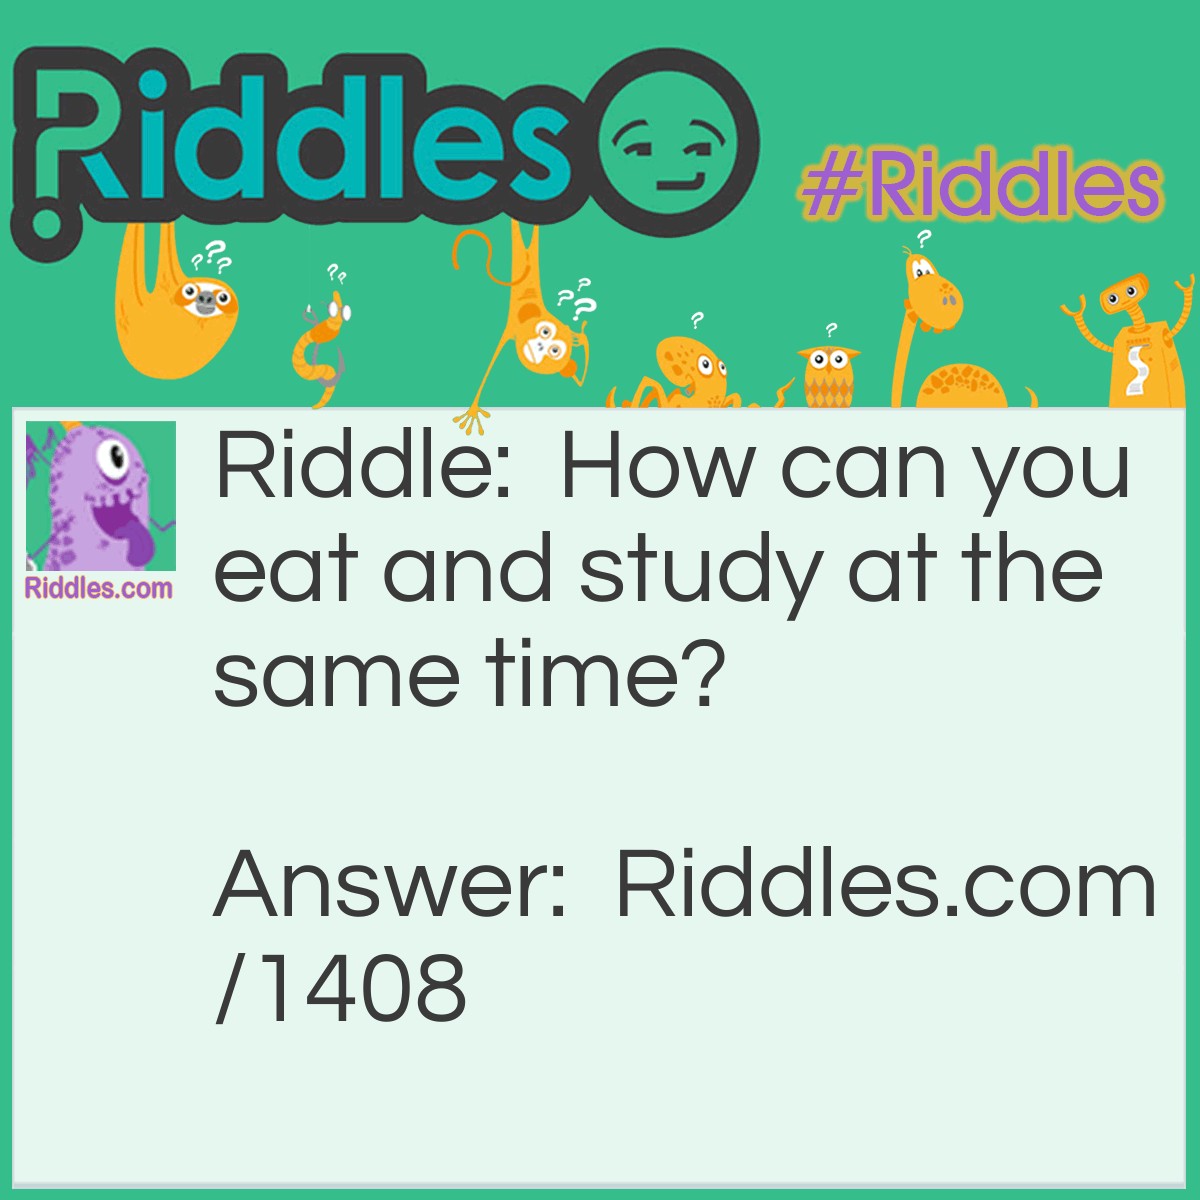 Riddle: How can you eat and study at the same time? Answer: Eat alphabet soup.